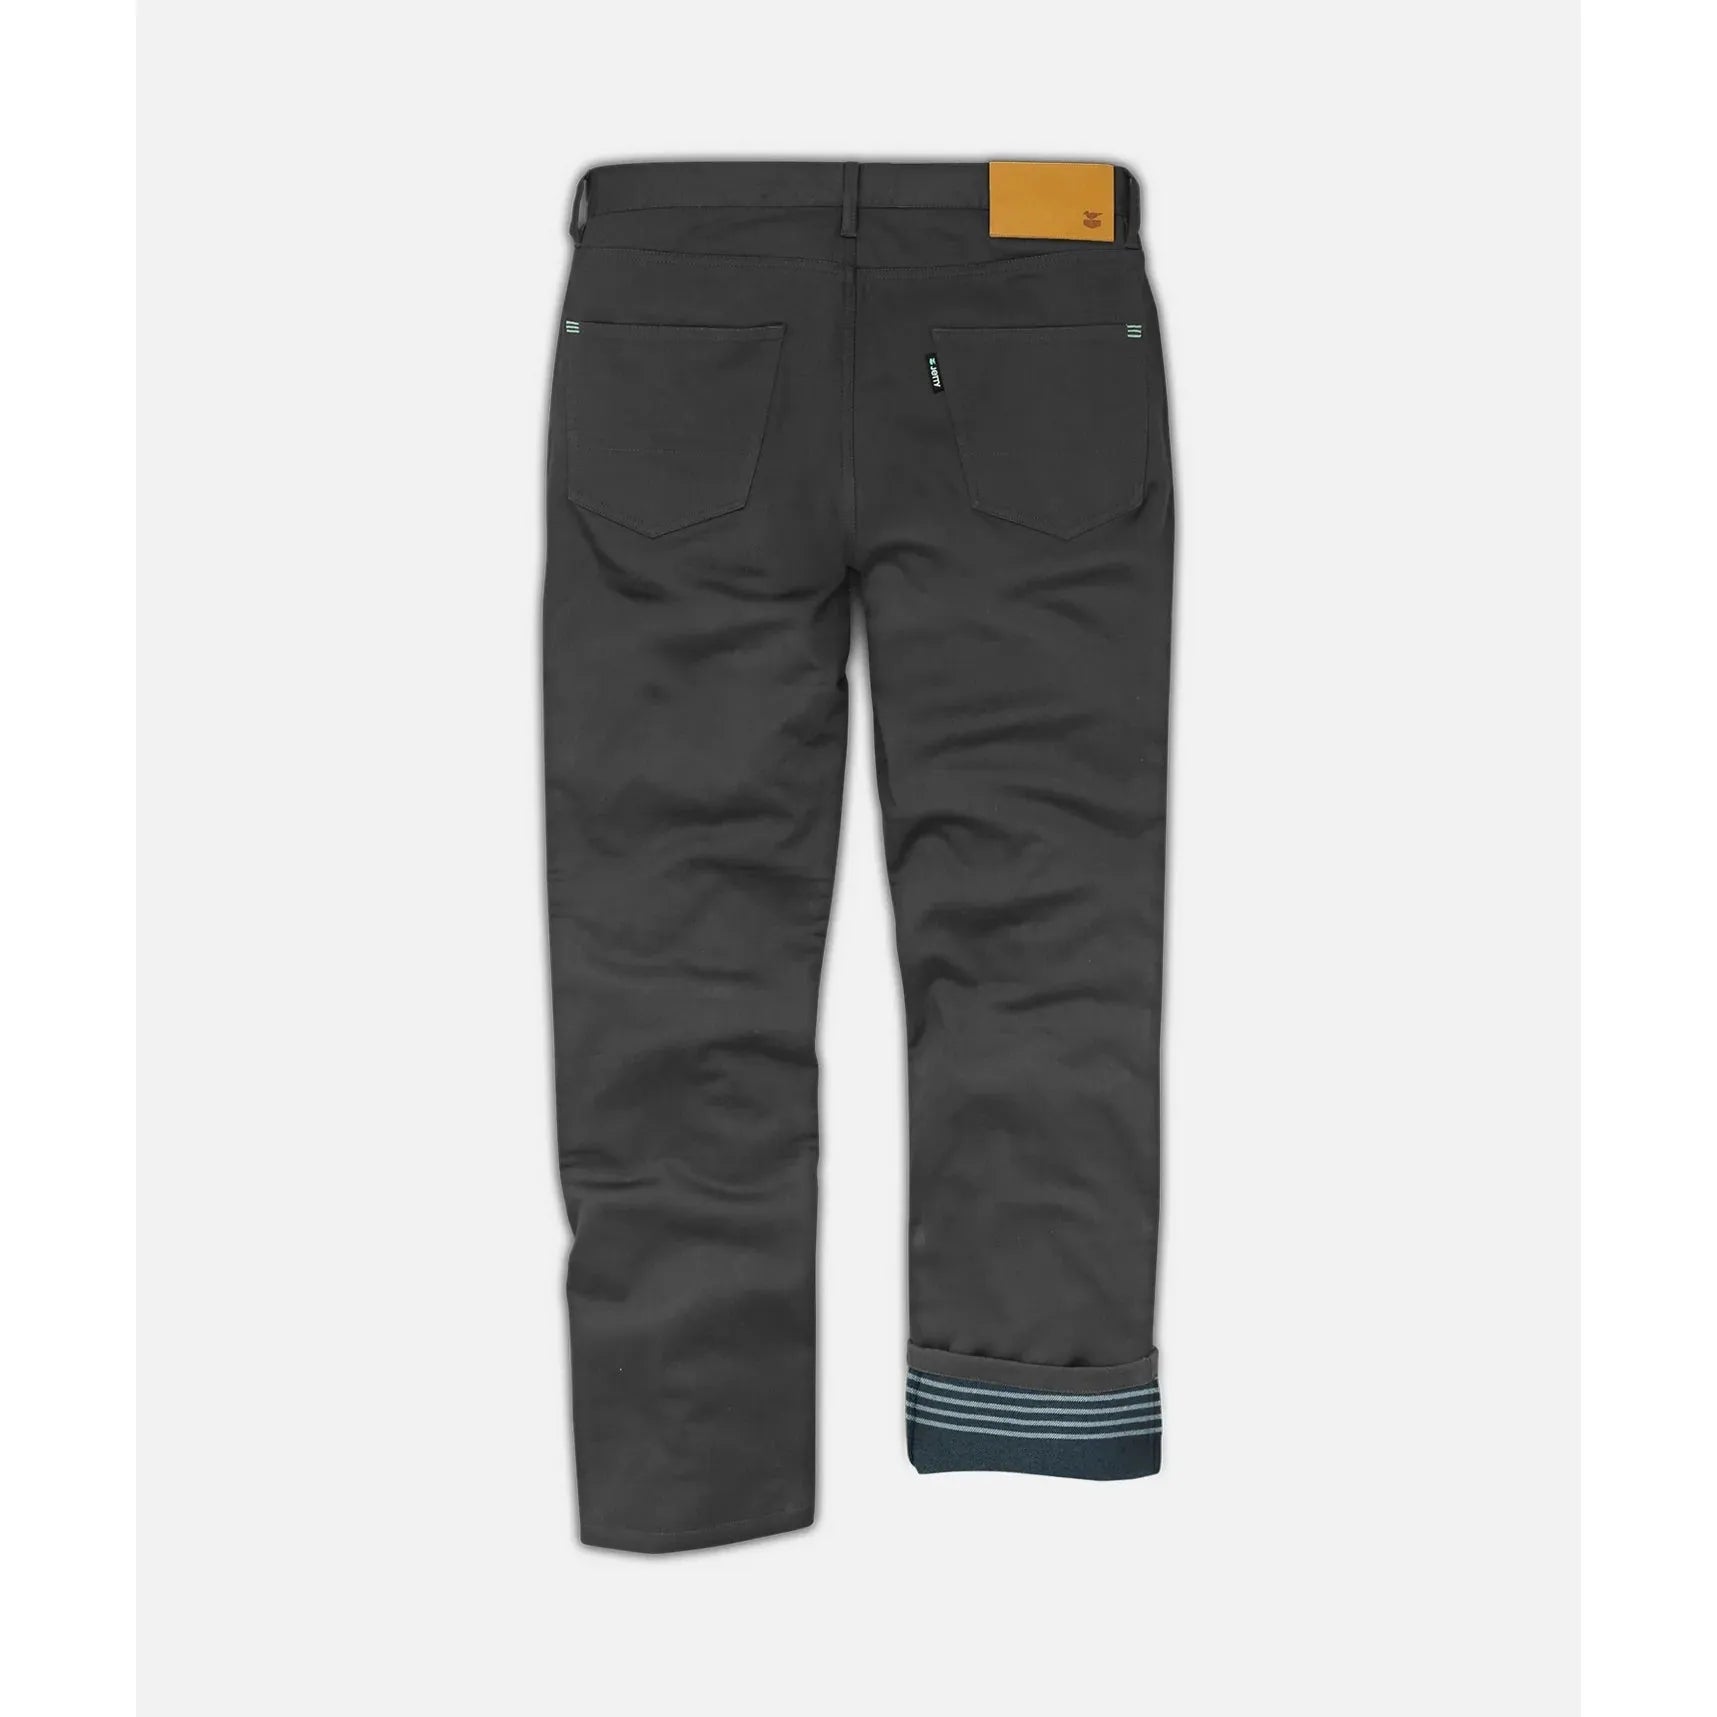 Jetty Mariner Pants Charcoal - FULLSEND SKI AND OUTDOOR